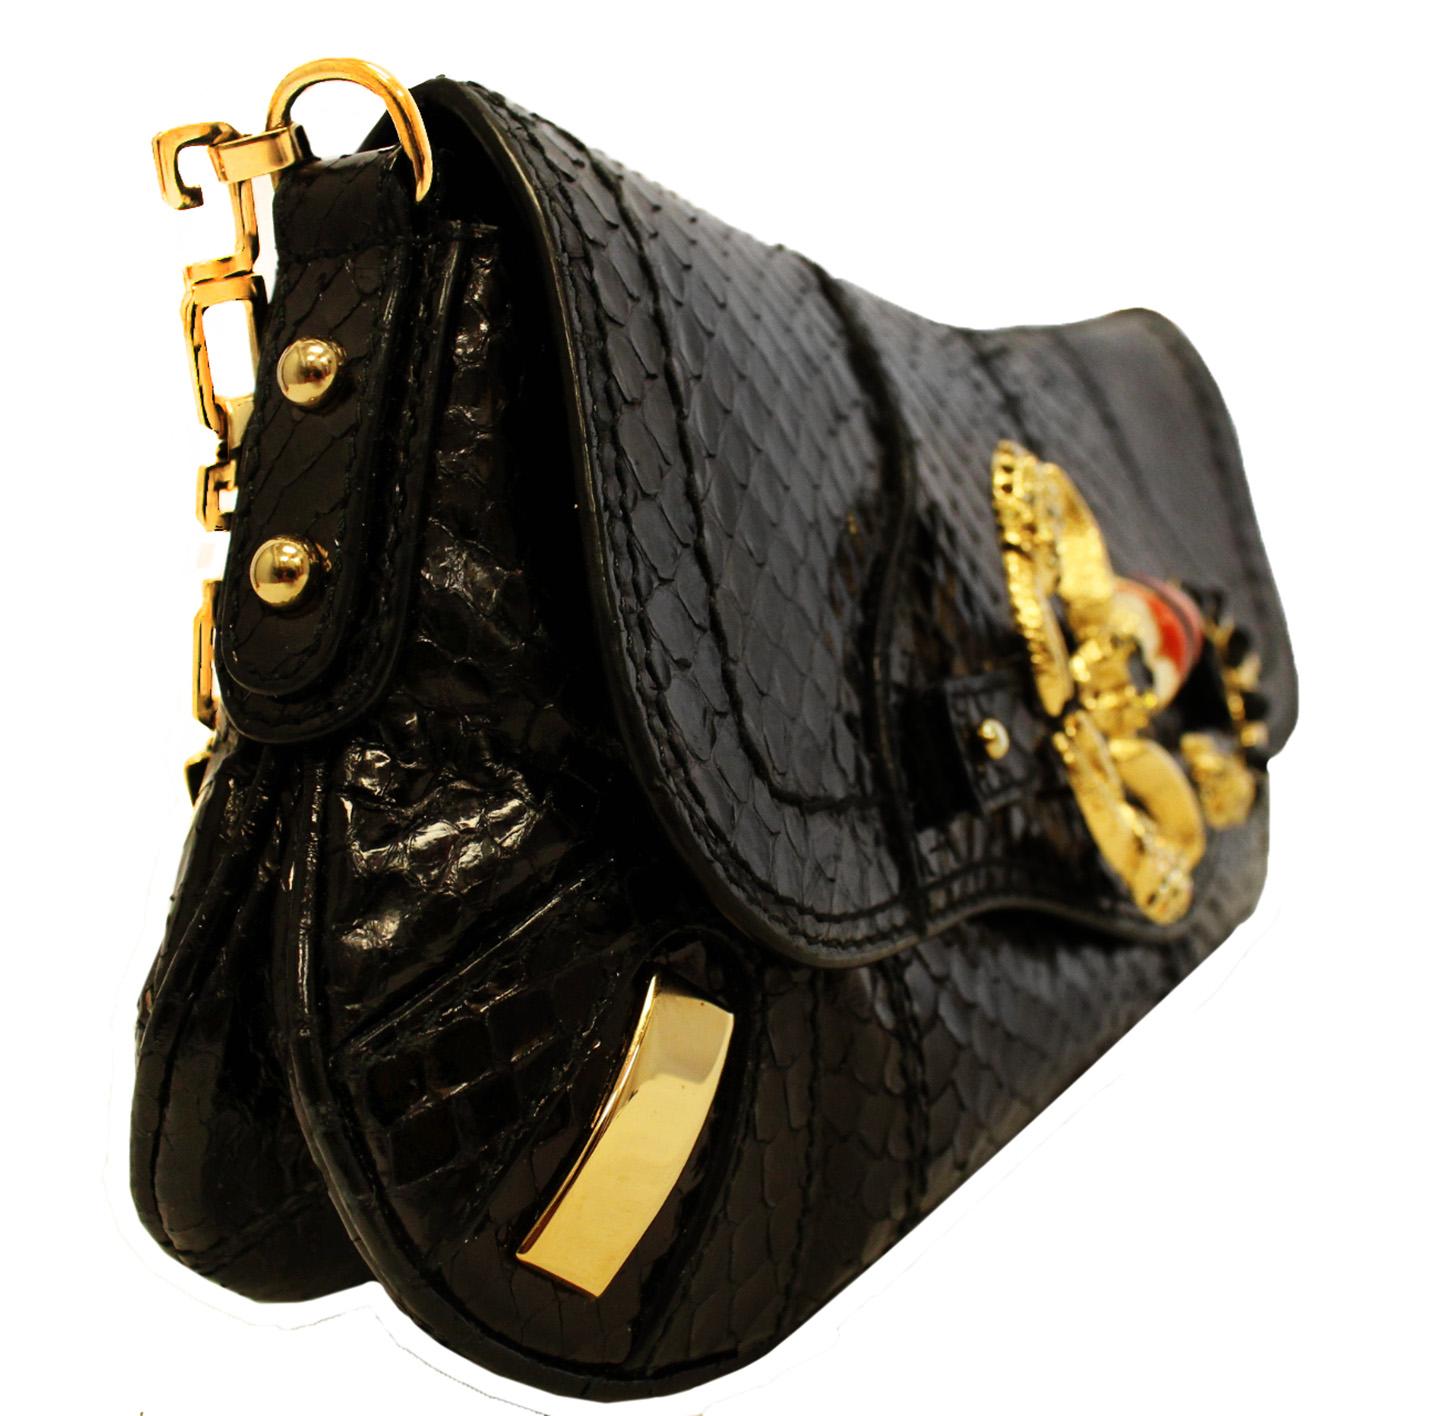 Dolce & Gabbana black python bag decorated with beads scorpion brooch on flap.  This bag is part of the Zodiac Collection created by Dolce & Gabbana, with all the zodiac signs, this Scorpio bag is a rare find.   With a chain link shoulder strap that